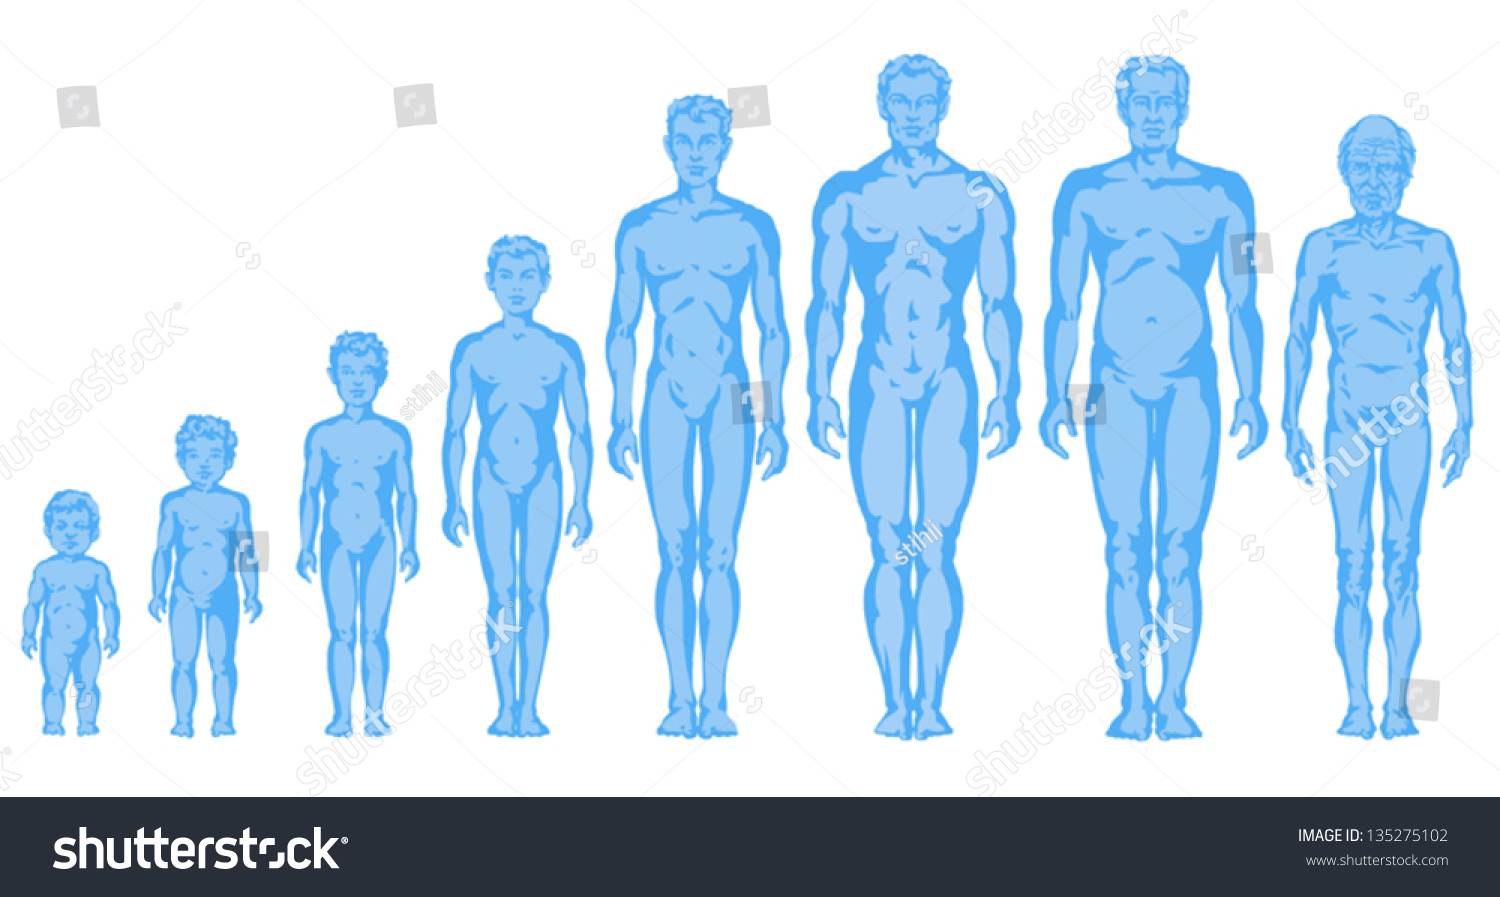 Increasing Male Body Shapes Proportions Of Man Child Adolescent Old